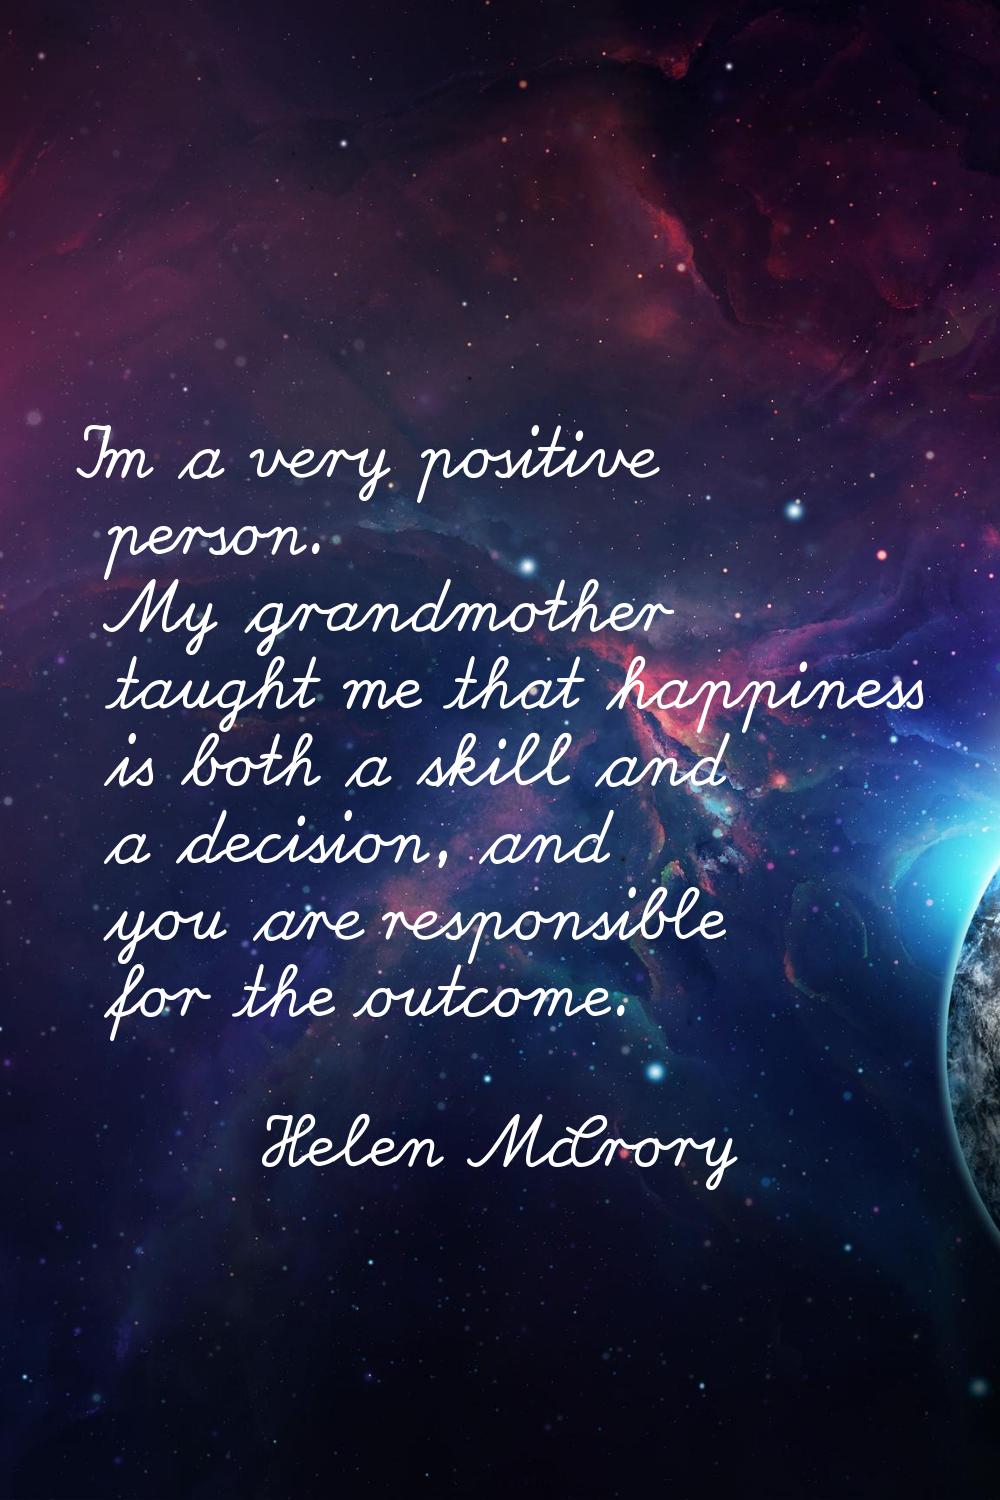 I'm a very positive person. My grandmother taught me that happiness is both a skill and a decision,